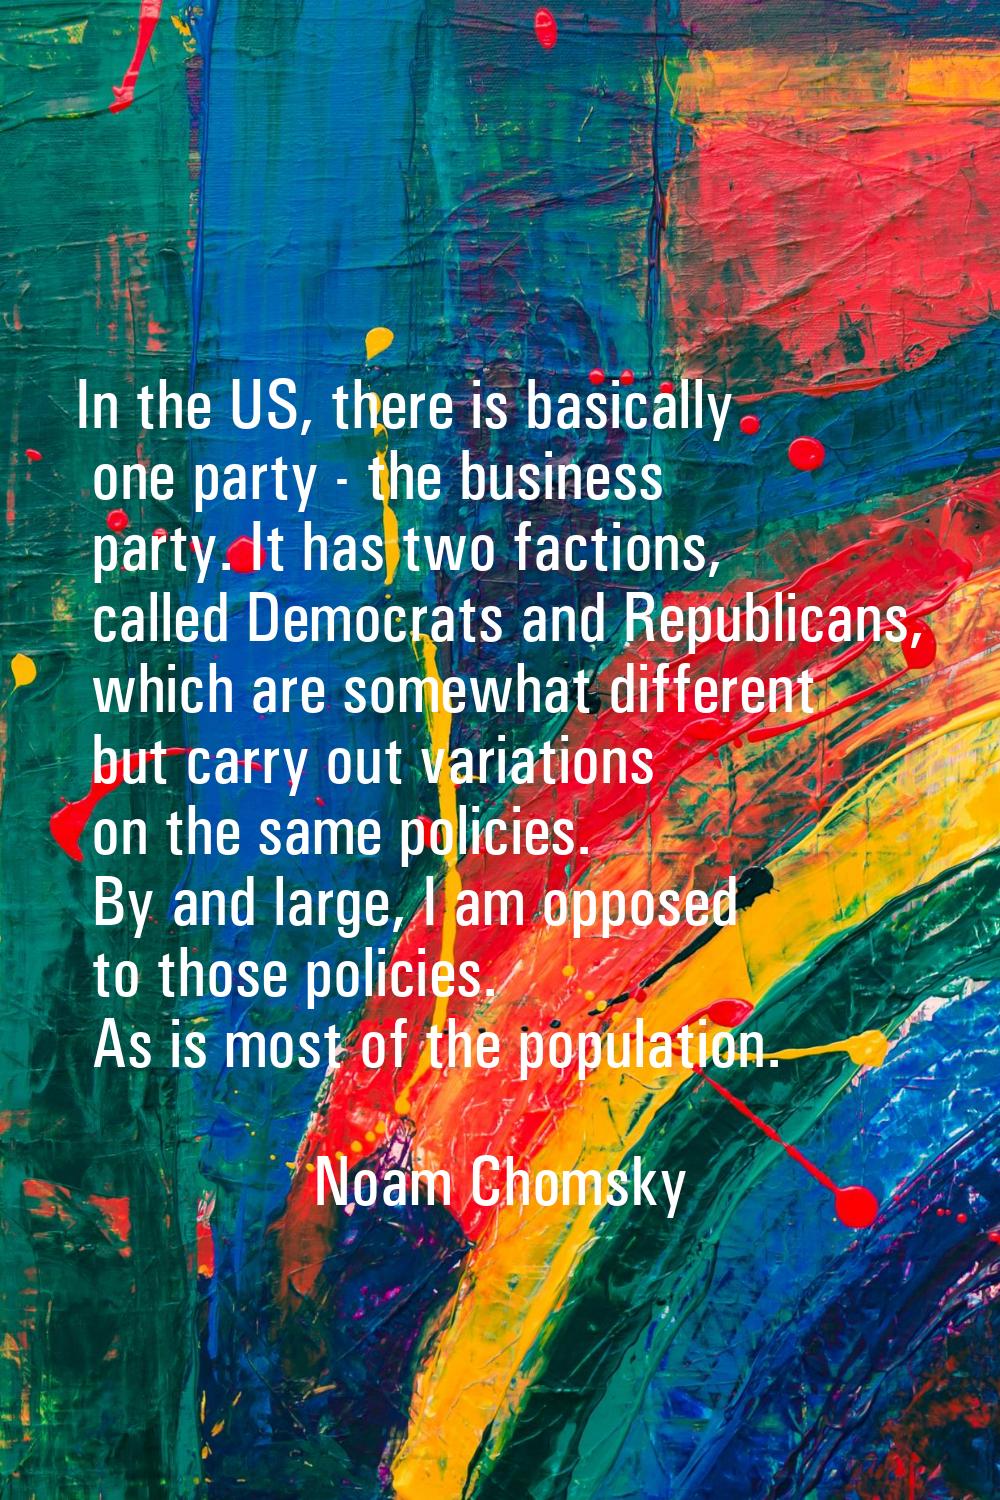 In the US, there is basically one party - the business party. It has two factions, called Democrats